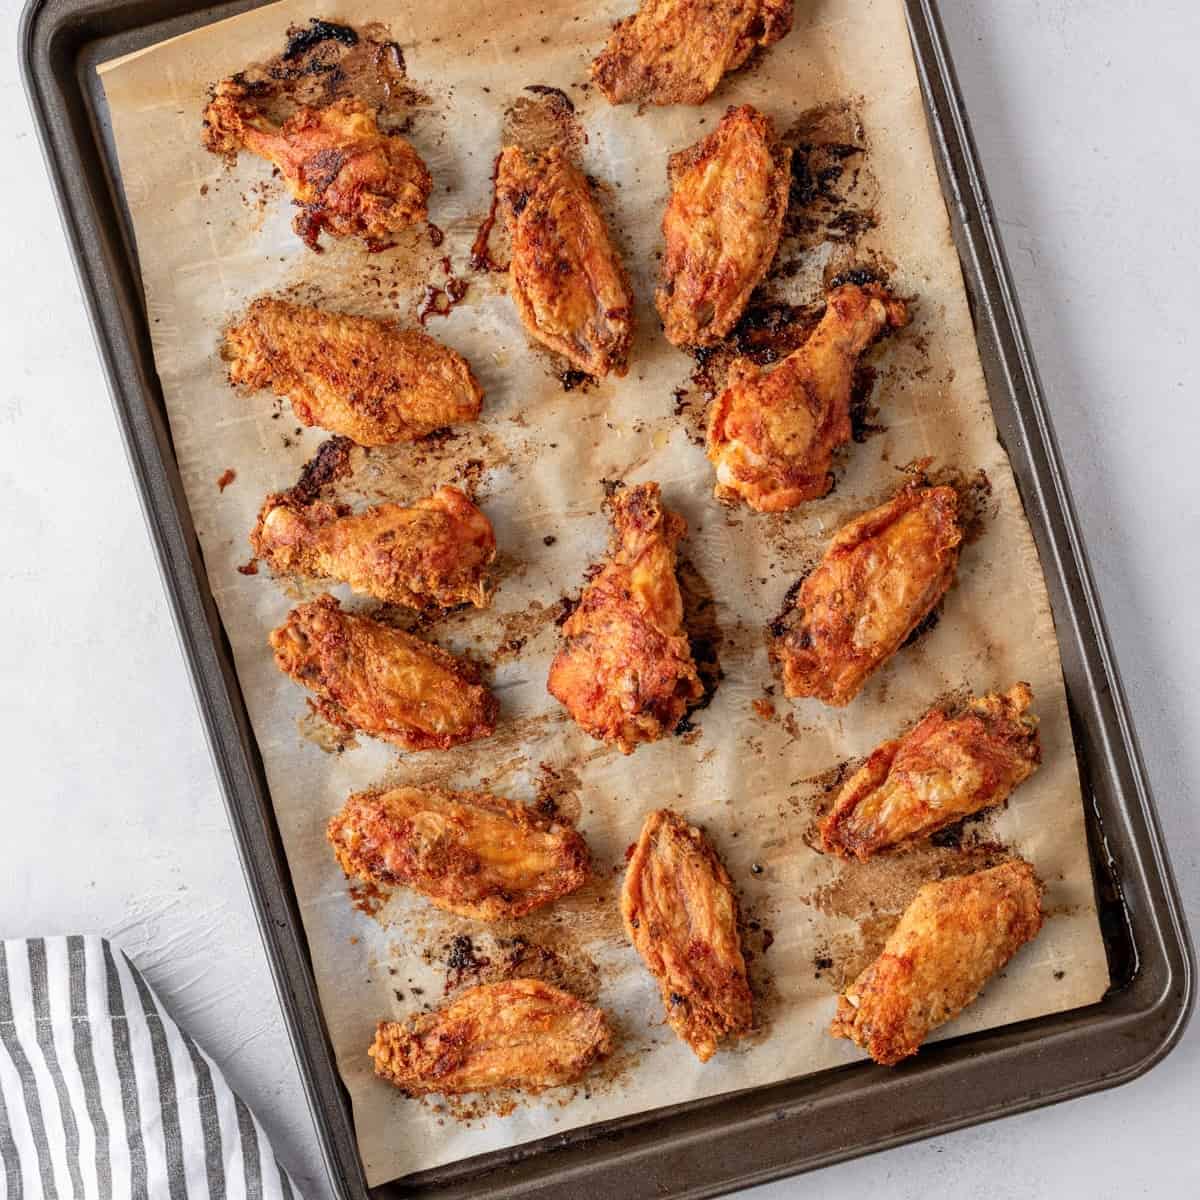 Overhead view of a baking tray with parchment paper and 15 baked wings on it